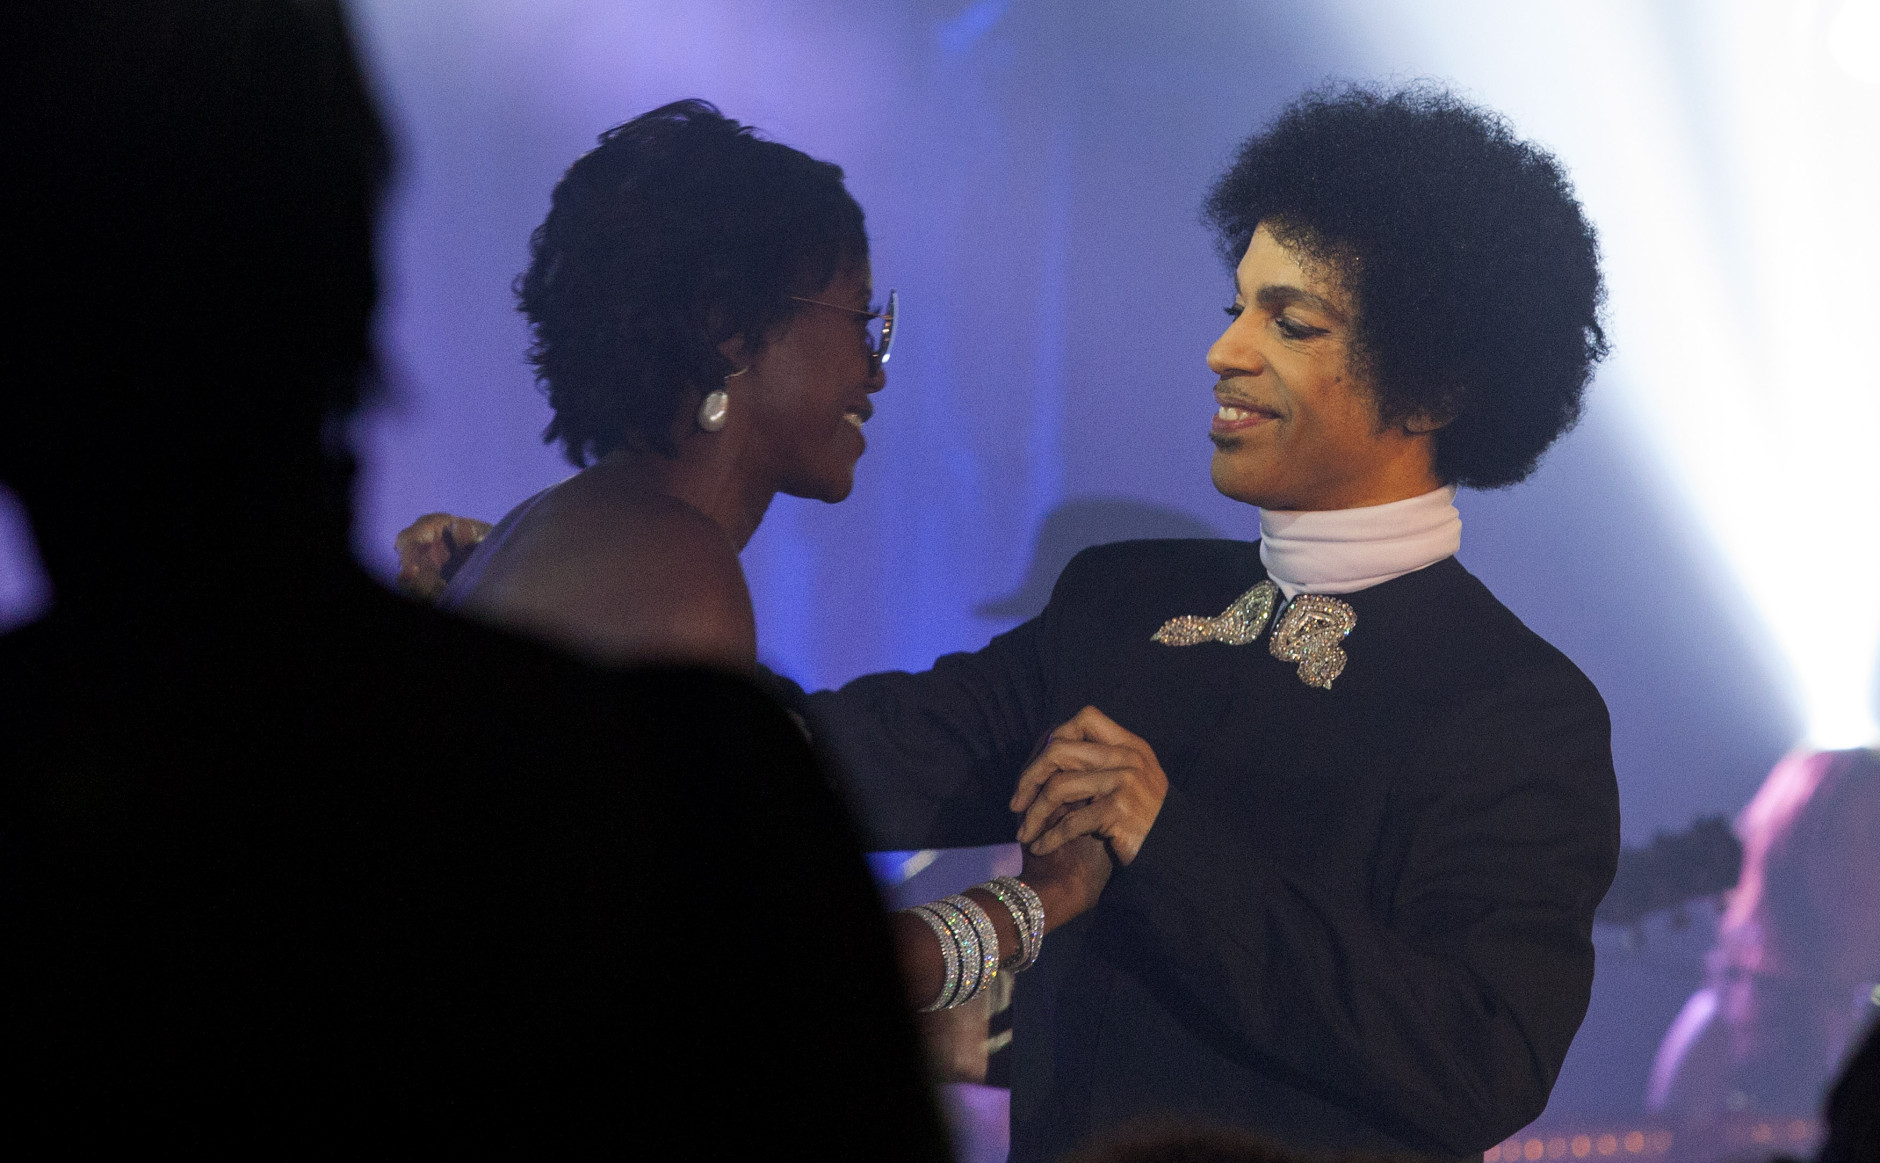 Mellody Hobson is pulled on stage with Prince during the George Lucas and Mellody Hobson's wedding reception at Promontory Point on Saturday, June 29, 2013 in Chicago. (Photo by Barry Brecheisen/Invision/AP)